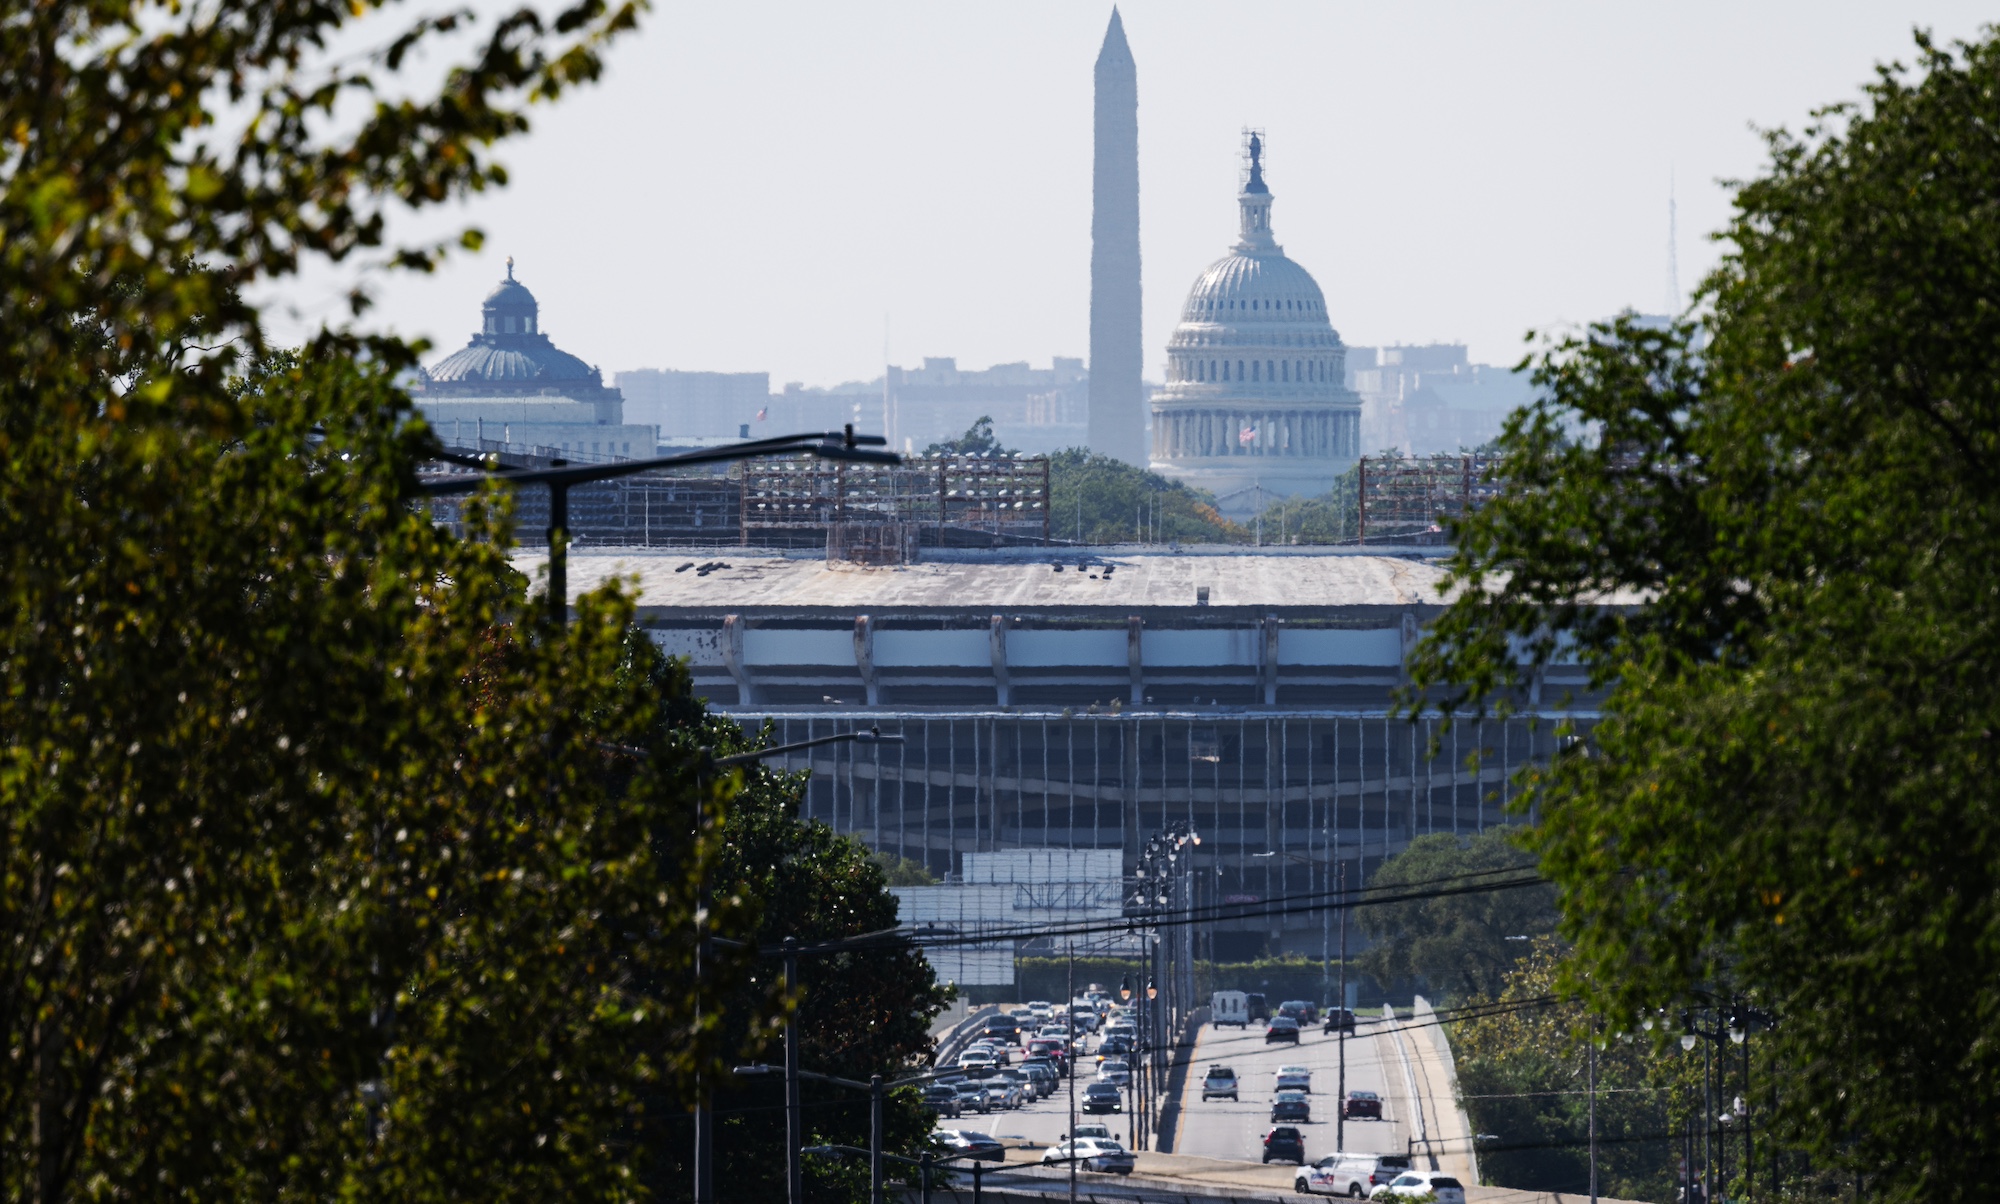 WASHINGTON, DC - SEPTEMBER 27: RFK Stadium is seen from East Capitol Street in Washington, DC on September 27, 2023. (Photo by Craig Hudson for The Washington Post via Getty Images)